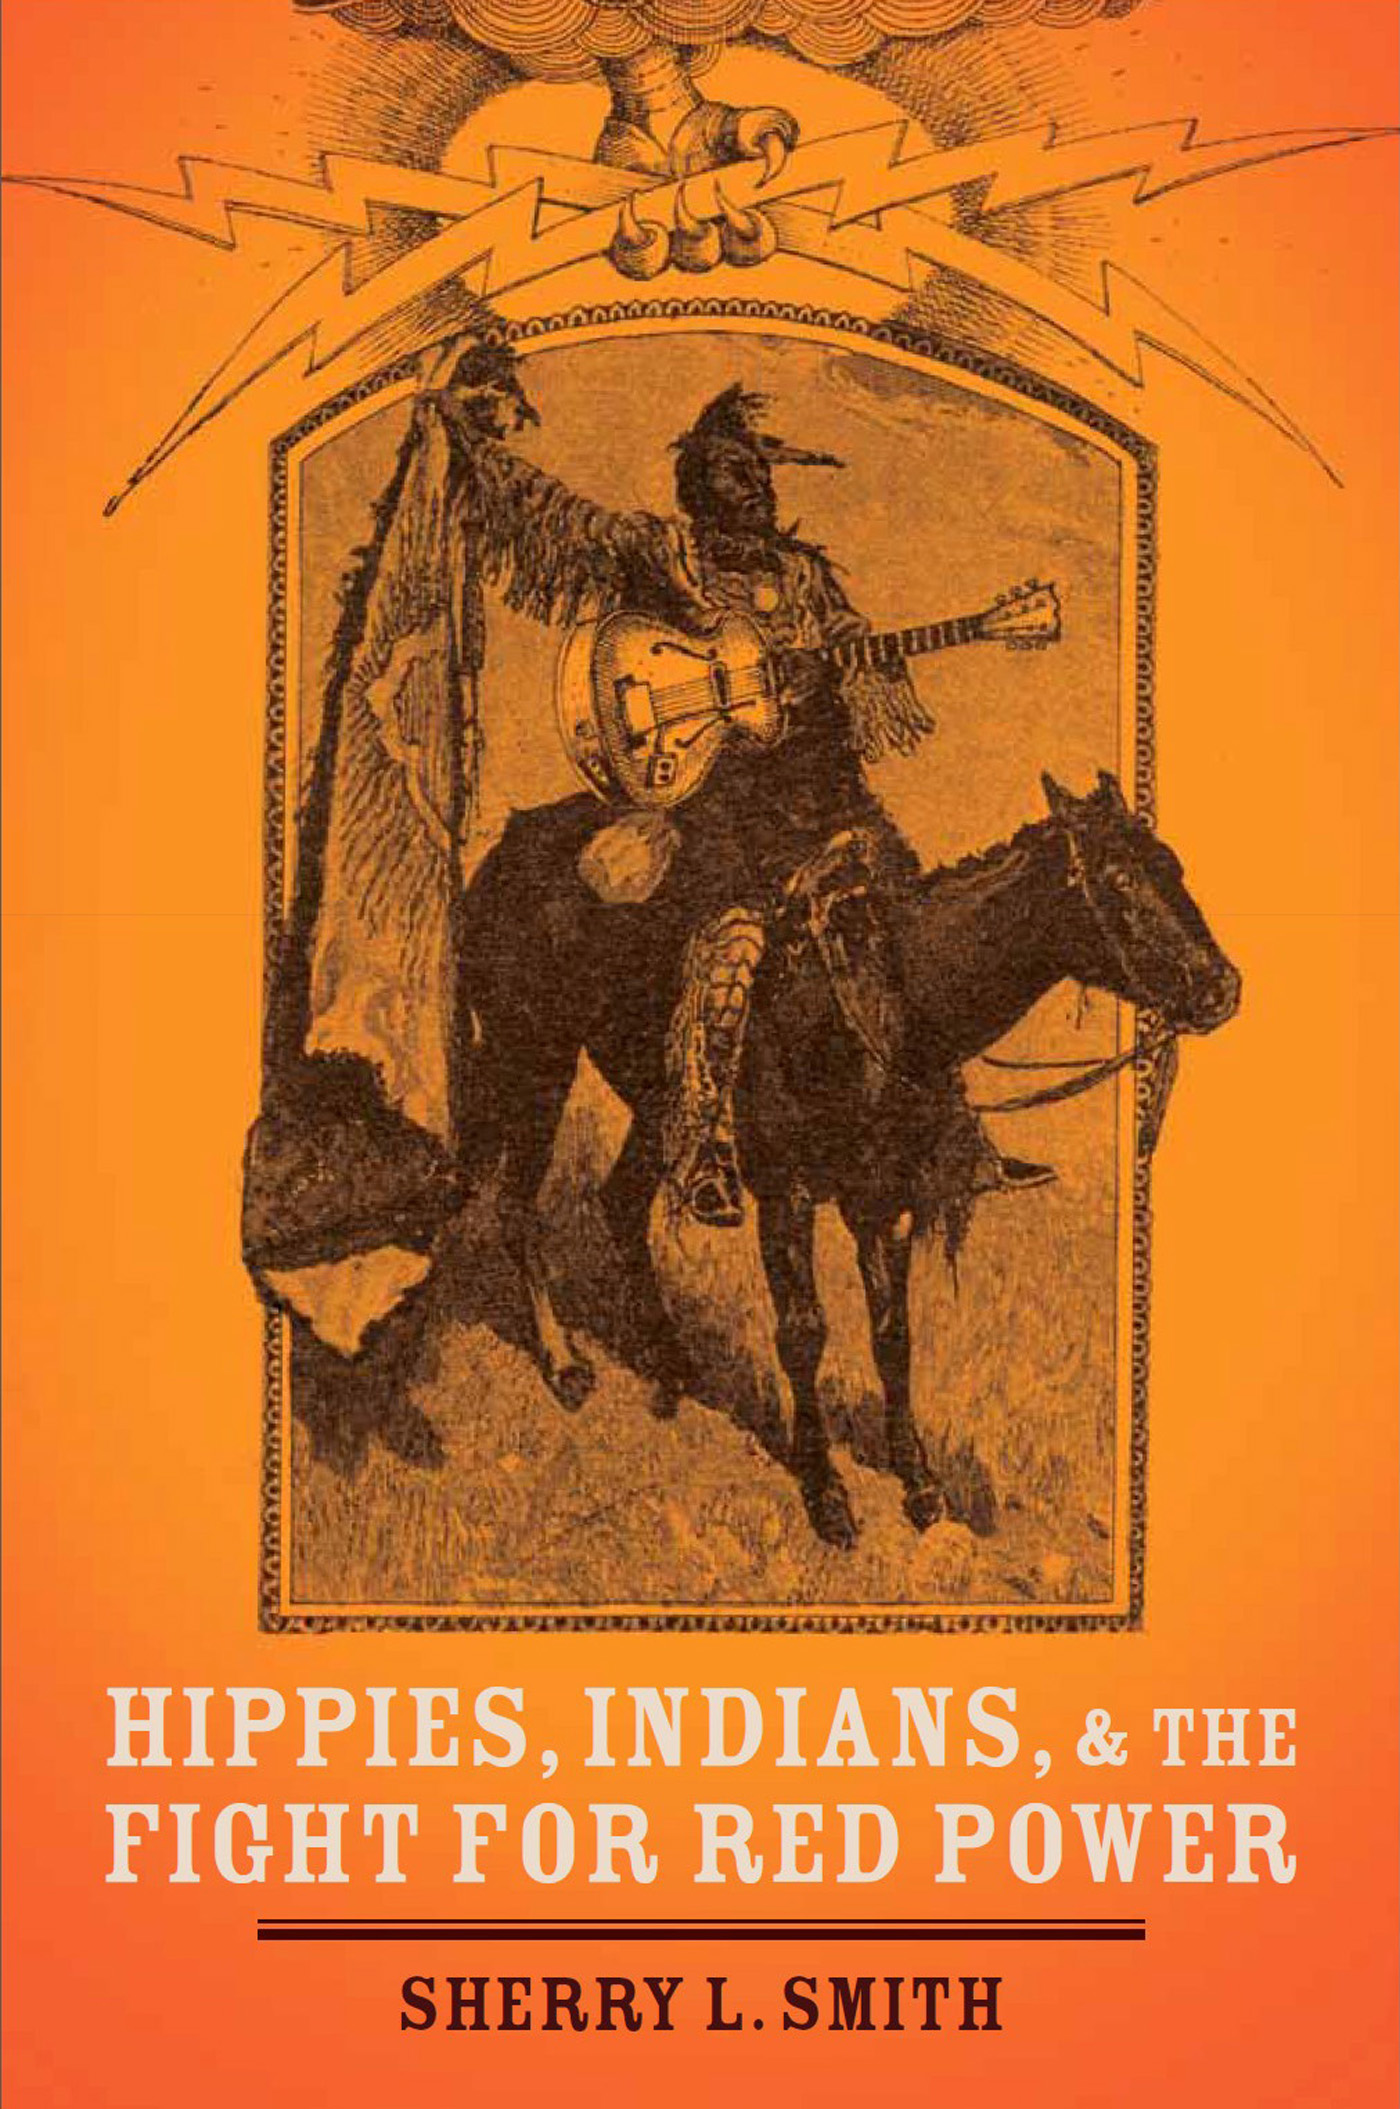 'Hippies, Indians, and the Fight for Red Power' book cover